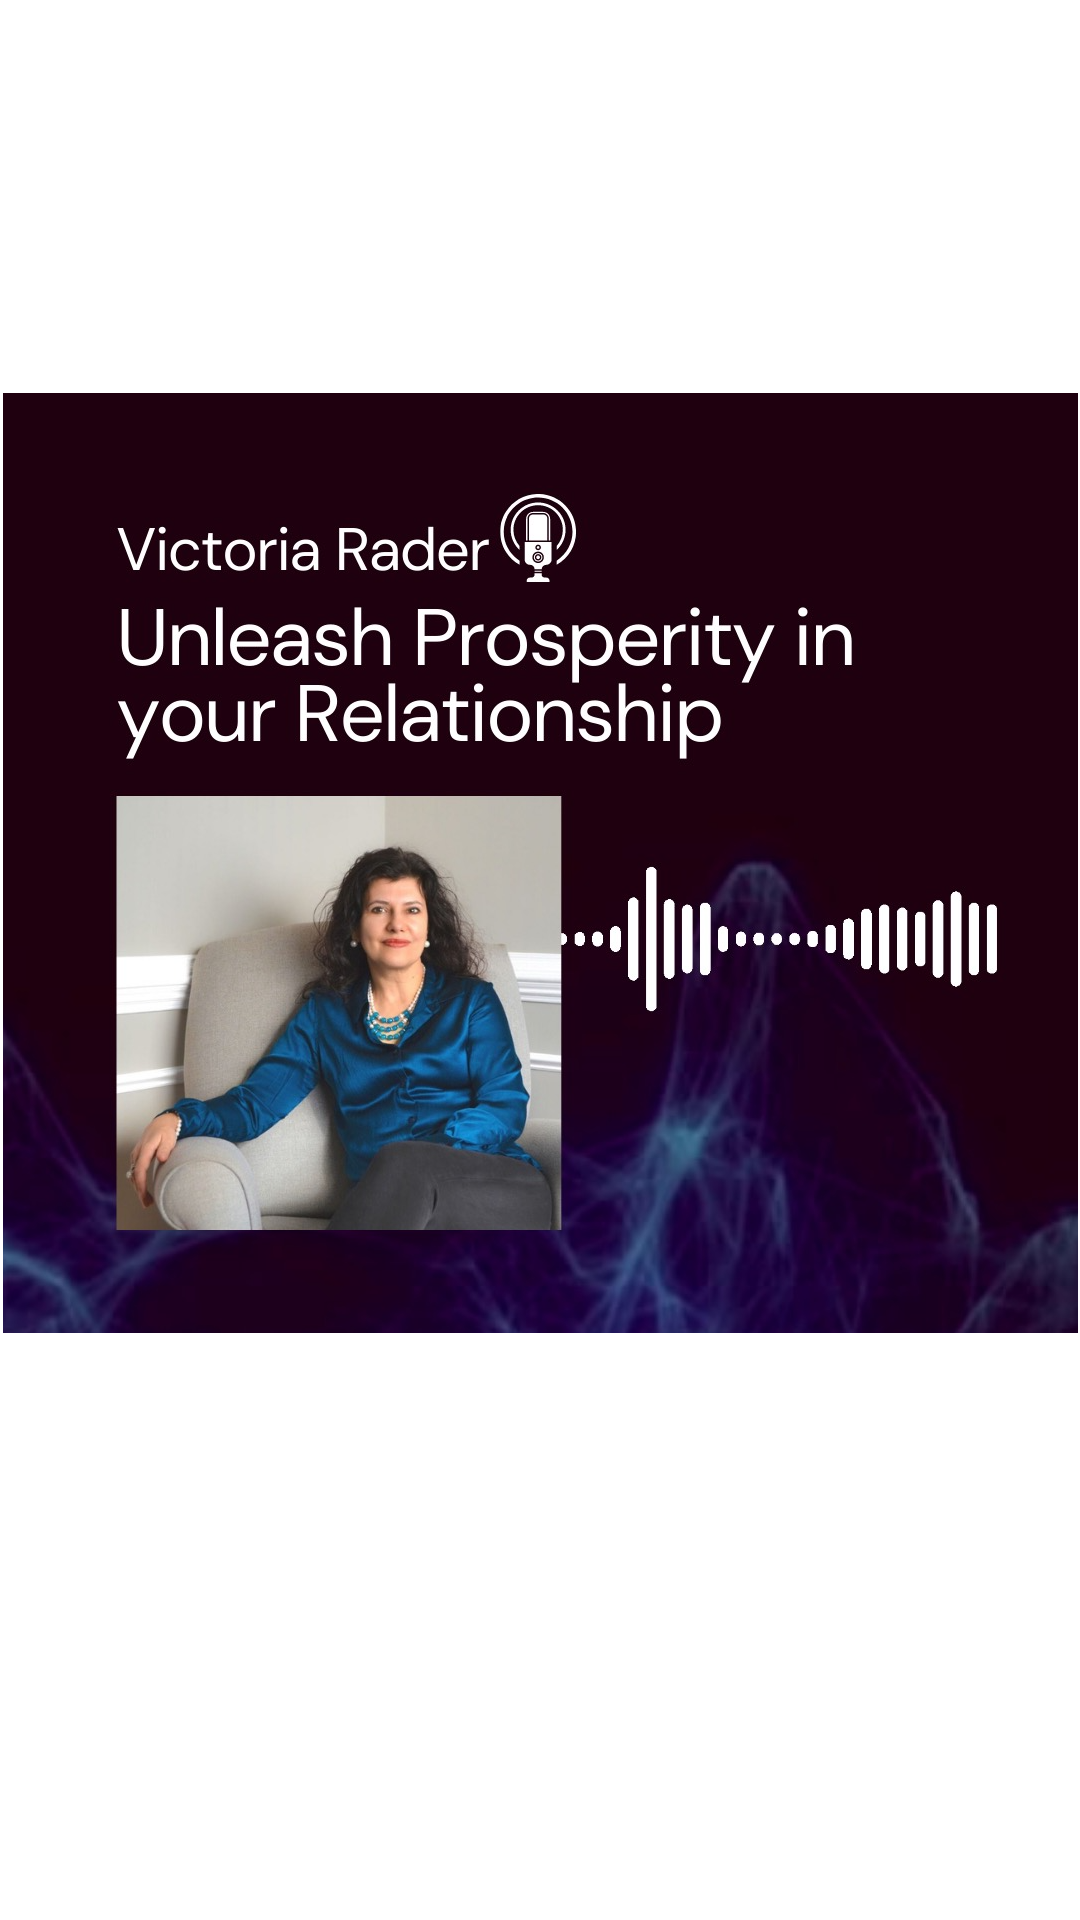 Unleash Prosperity in your Relationship with Victoria Rader a Possibility Coach